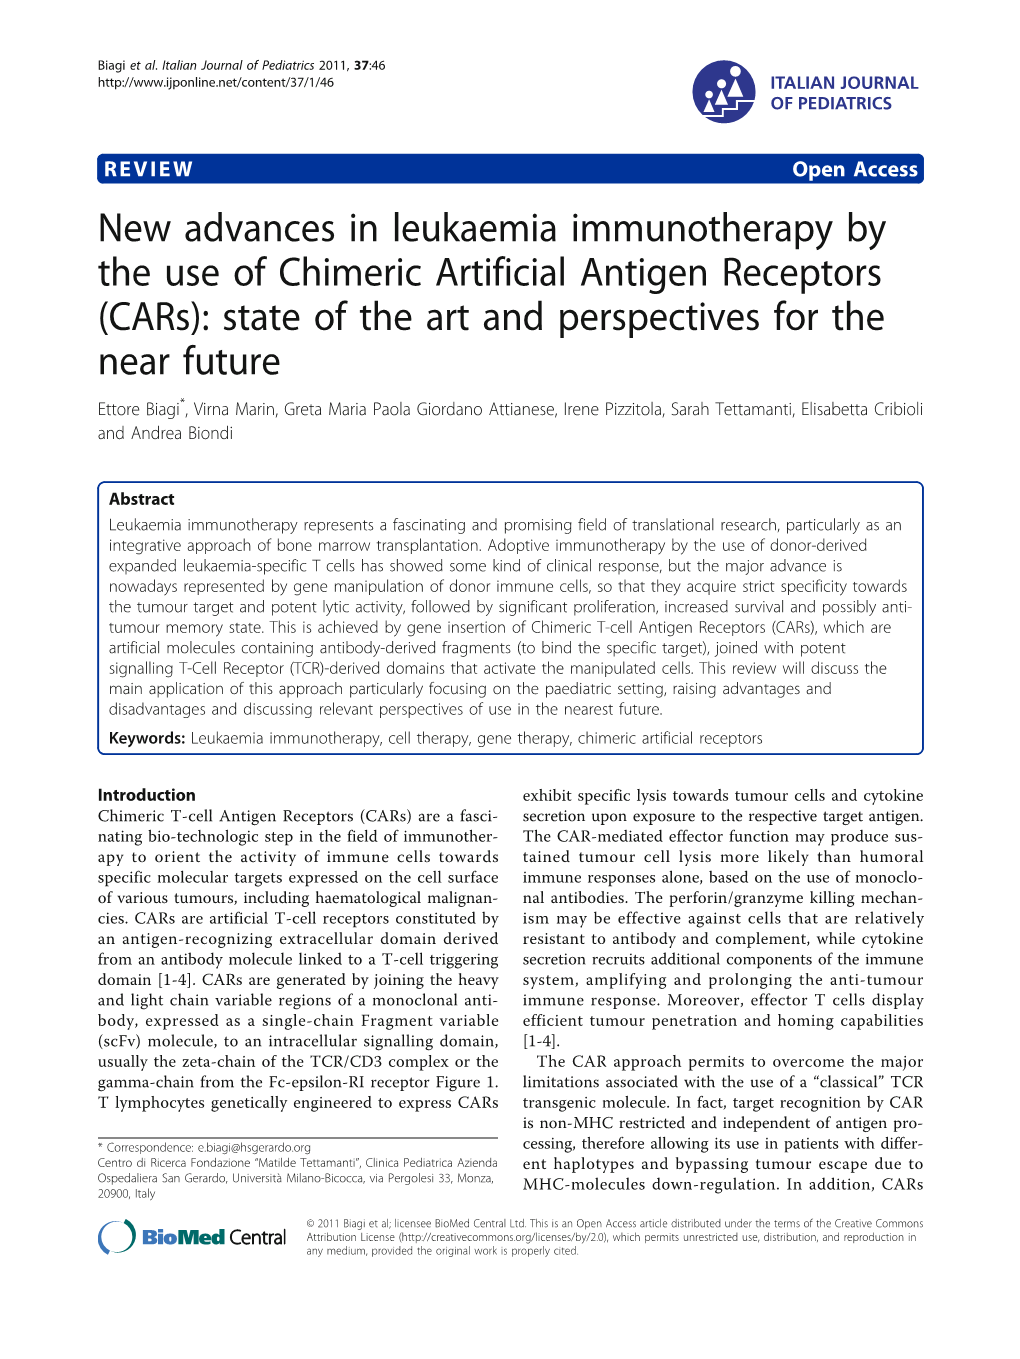 New Advances in Leukaemia Immunotherapy by the Use of Chimeric Artificial Antigen Receptors